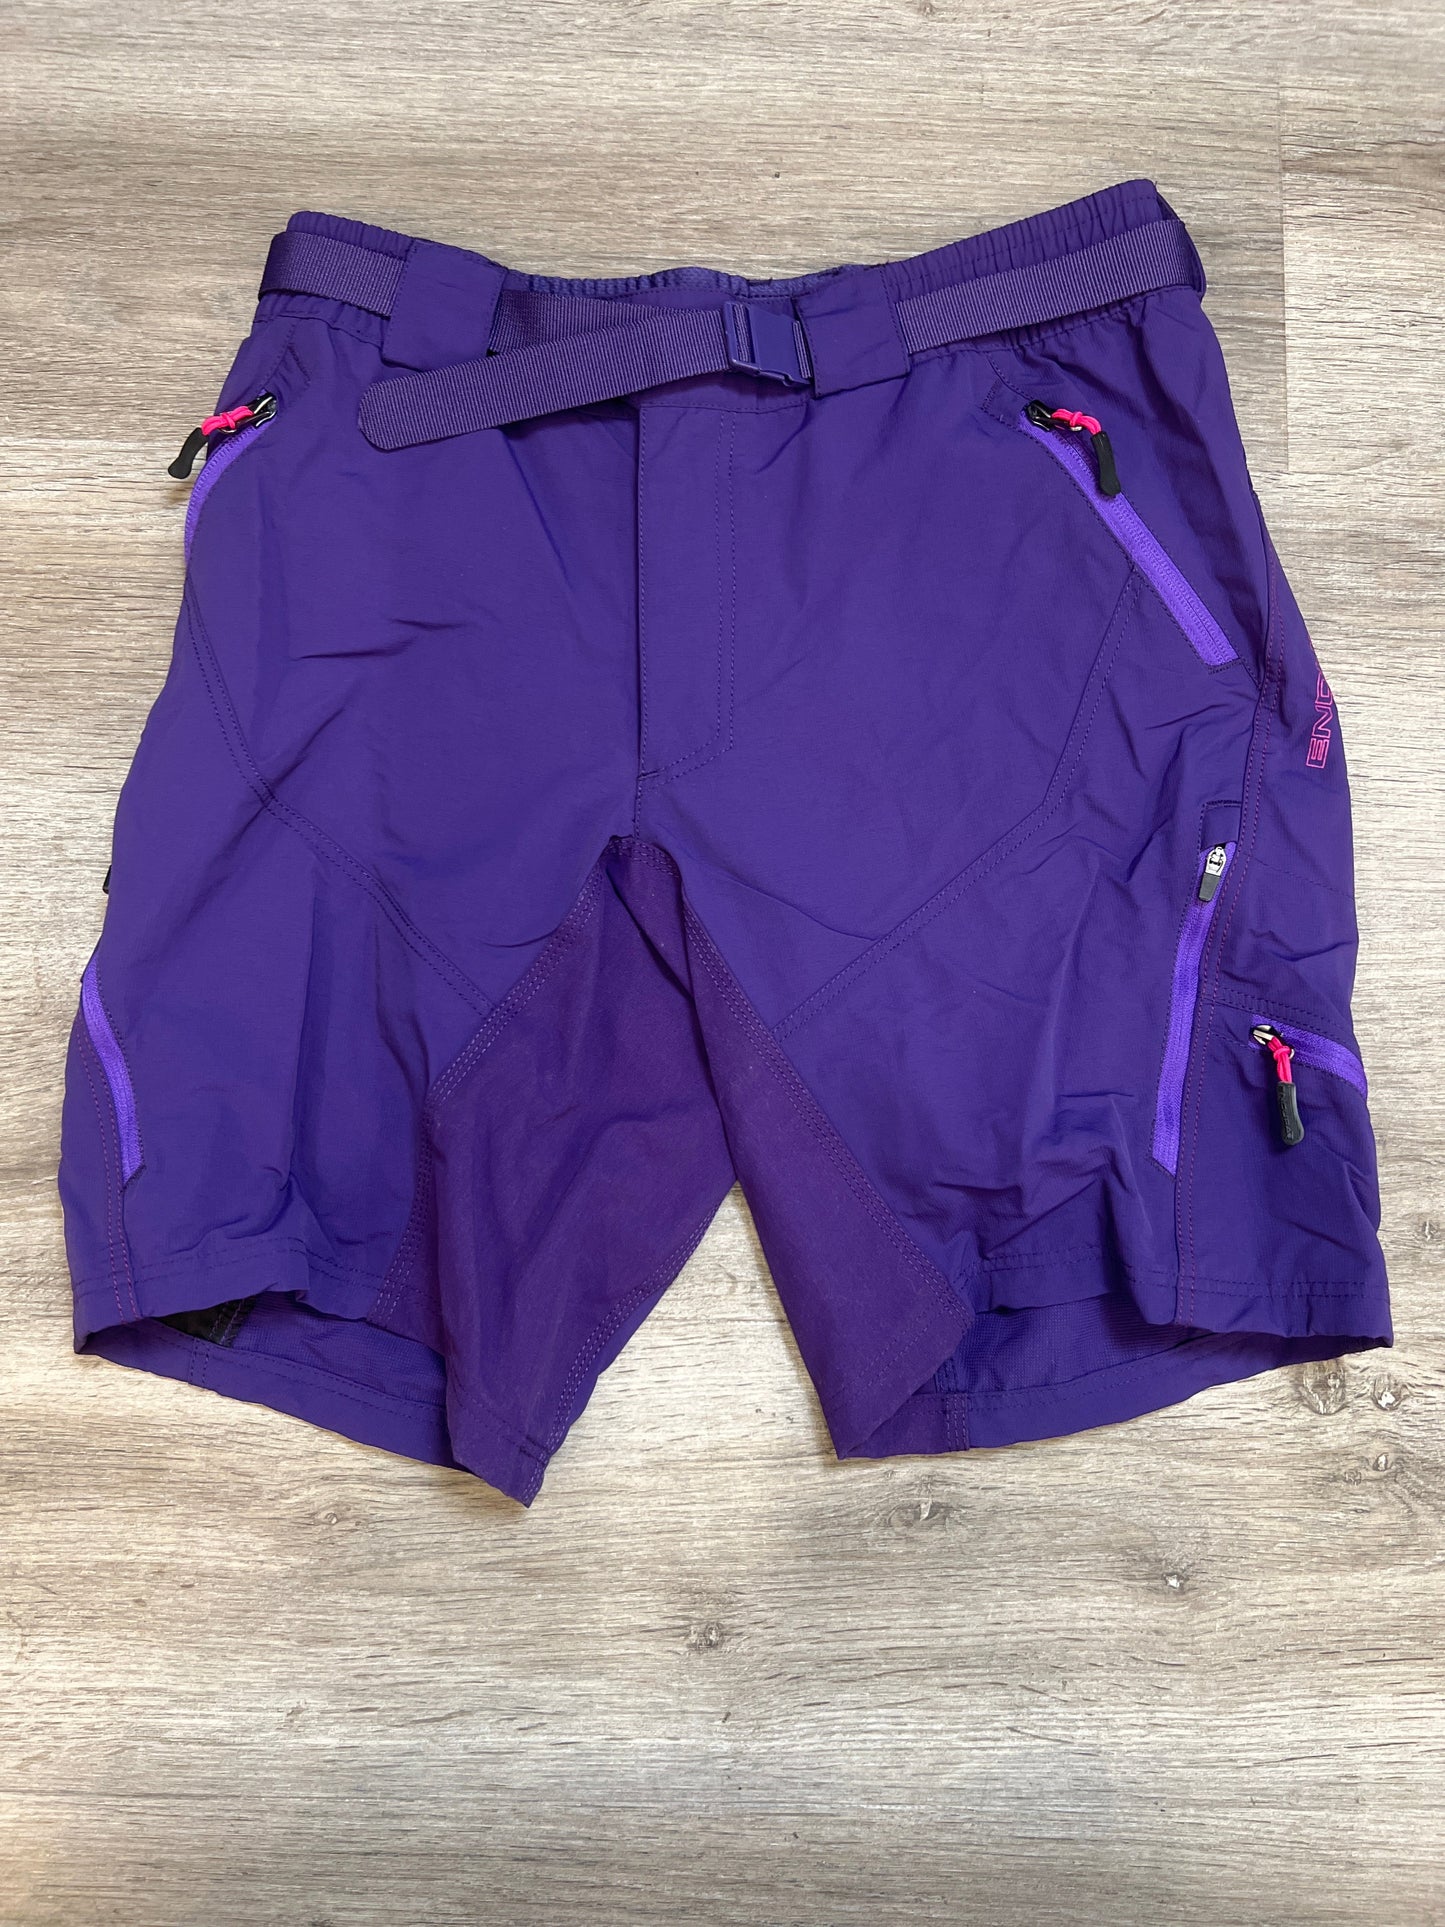 Shorts By Endura  Size: S